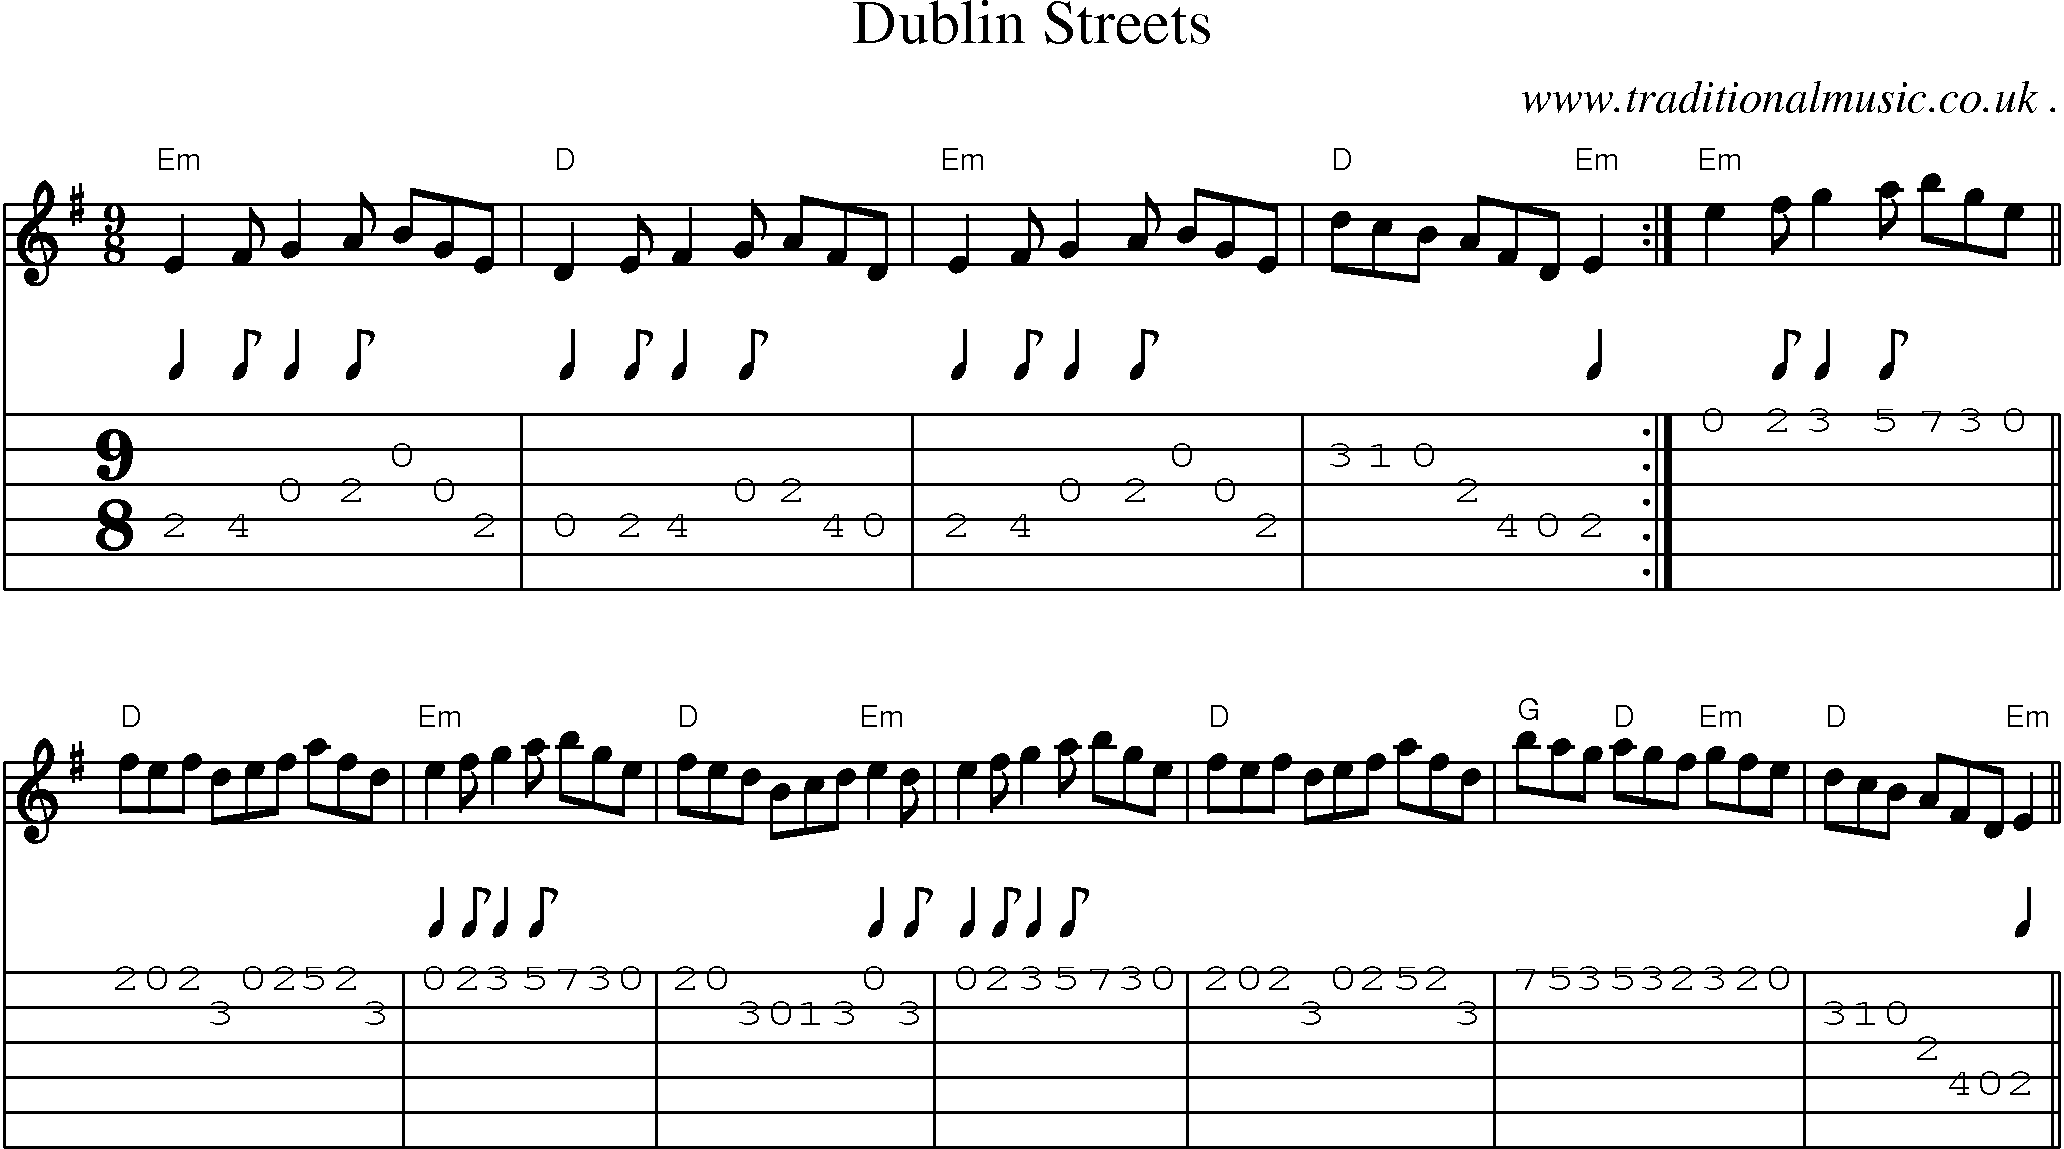 Music Score and Guitar Tabs for Dublin Streets